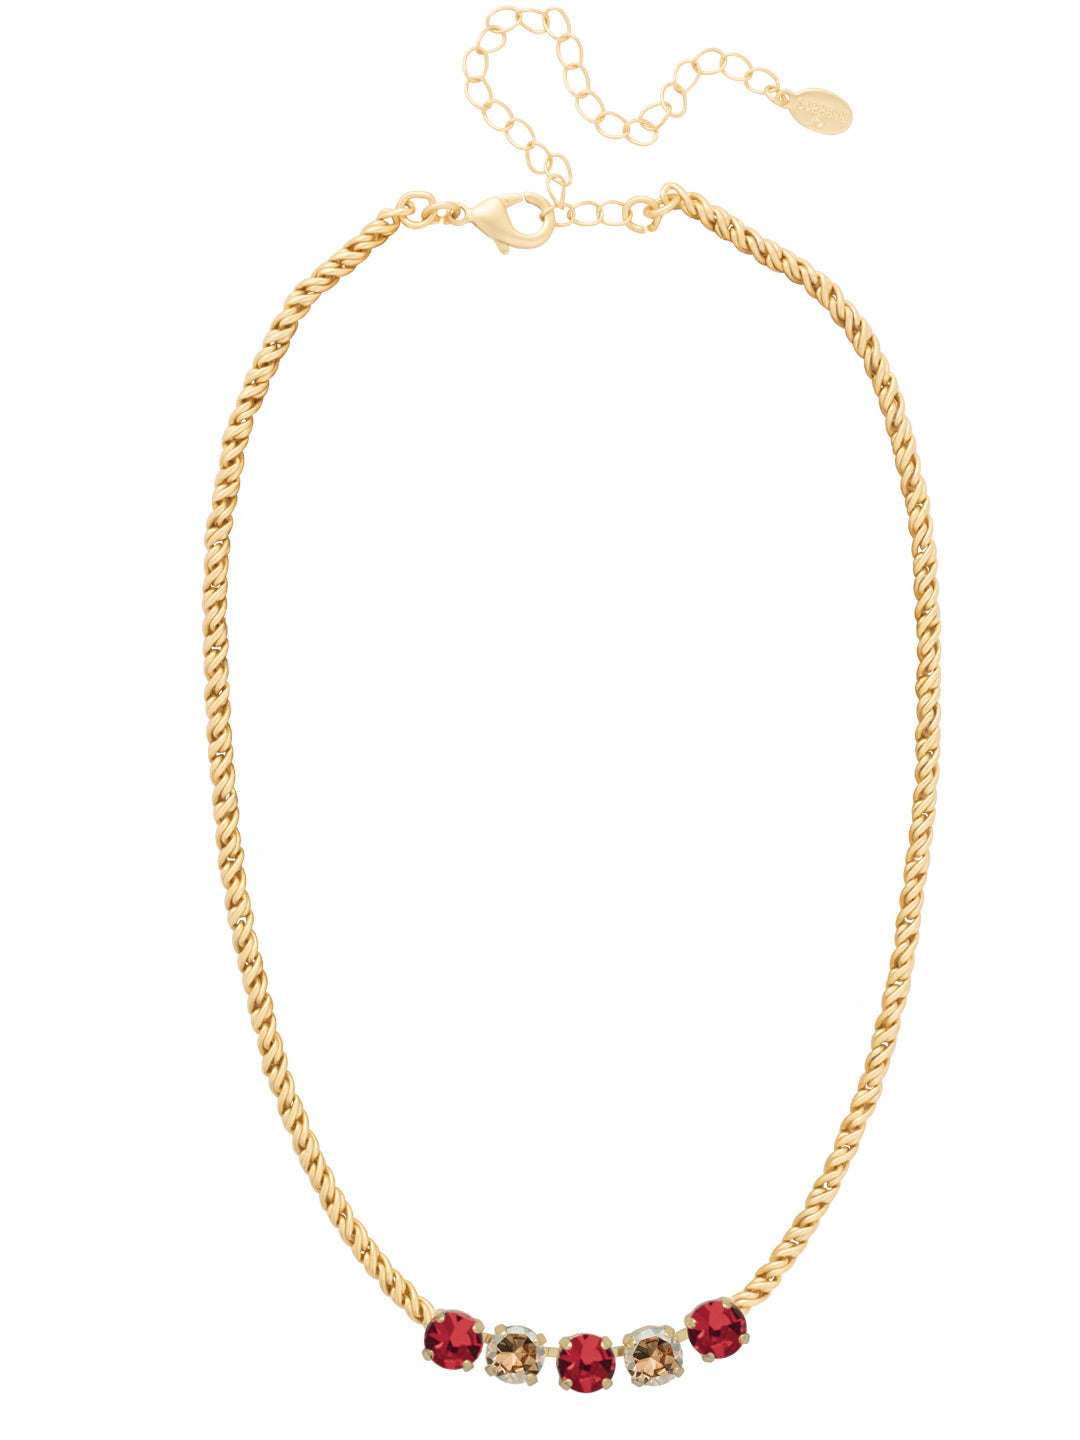 Shannon Tennis Necklace - NFL1BGGGA - <p>The Shannon Tennis Necklace features a line of five round cut crystals on an adjustable rope chain, secured by a lobster claw clasp. From Sorrelli's Go Garnet collection in our Bright Gold-tone finish.</p>